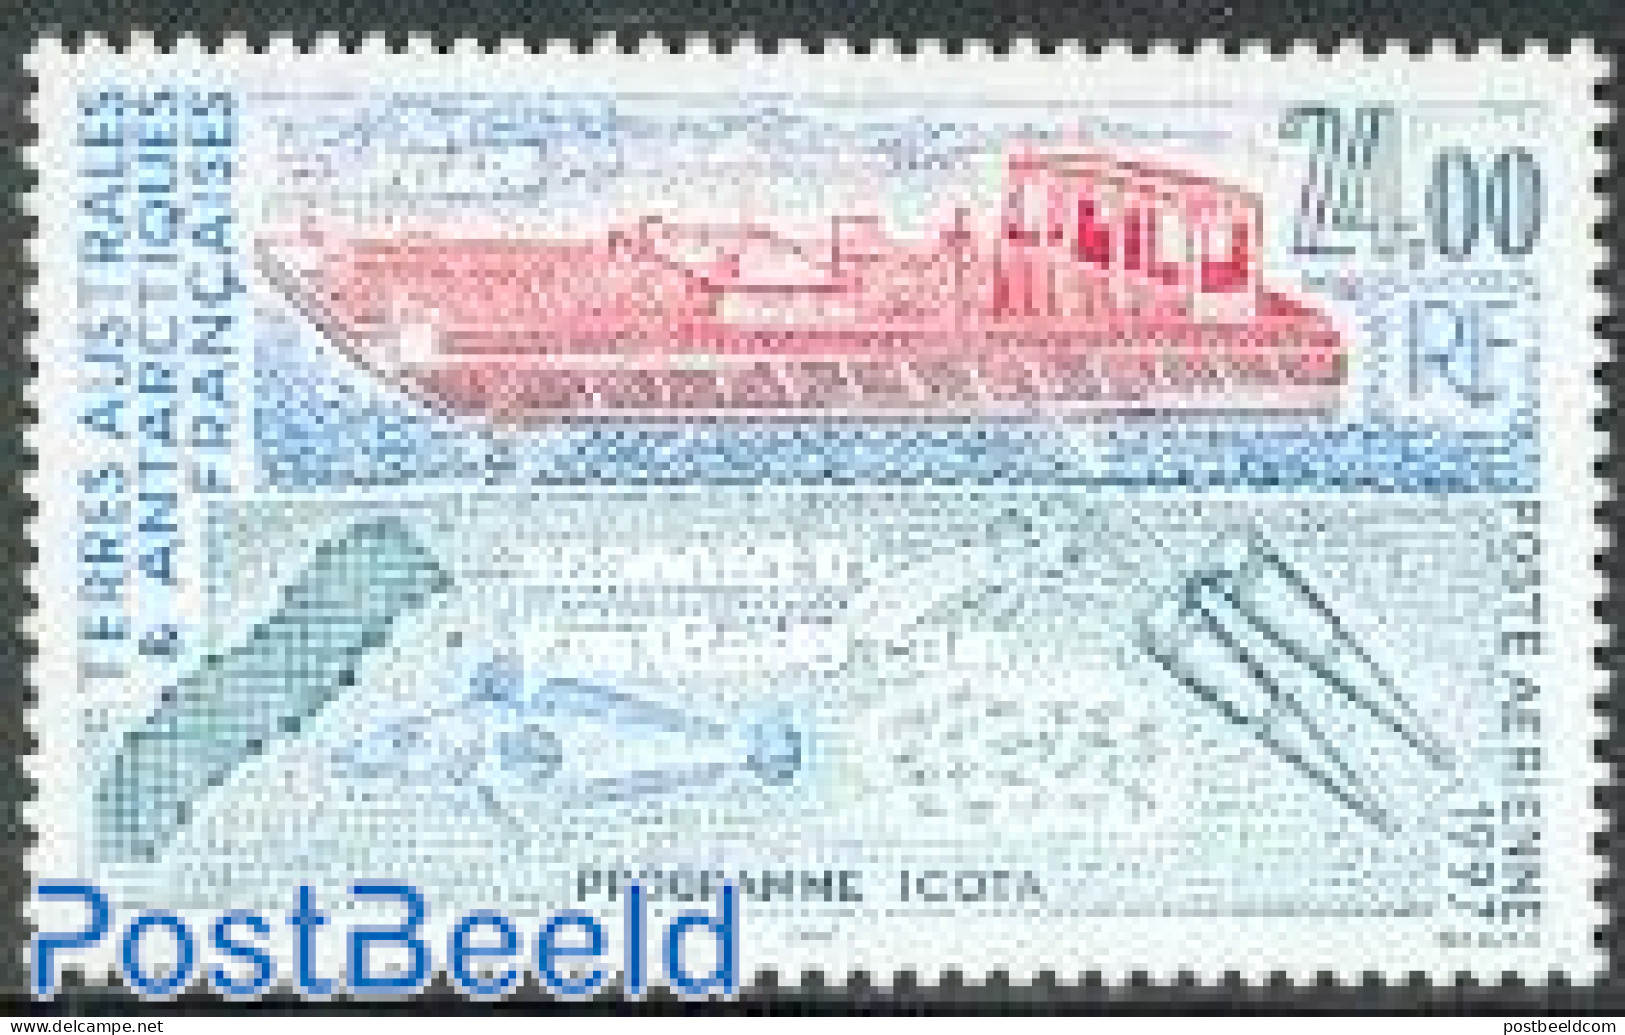 French Antarctic Territory 1997 Icota Programme 1v, Mint NH, Nature - Transport - Fishing - Ships And Boats - Neufs